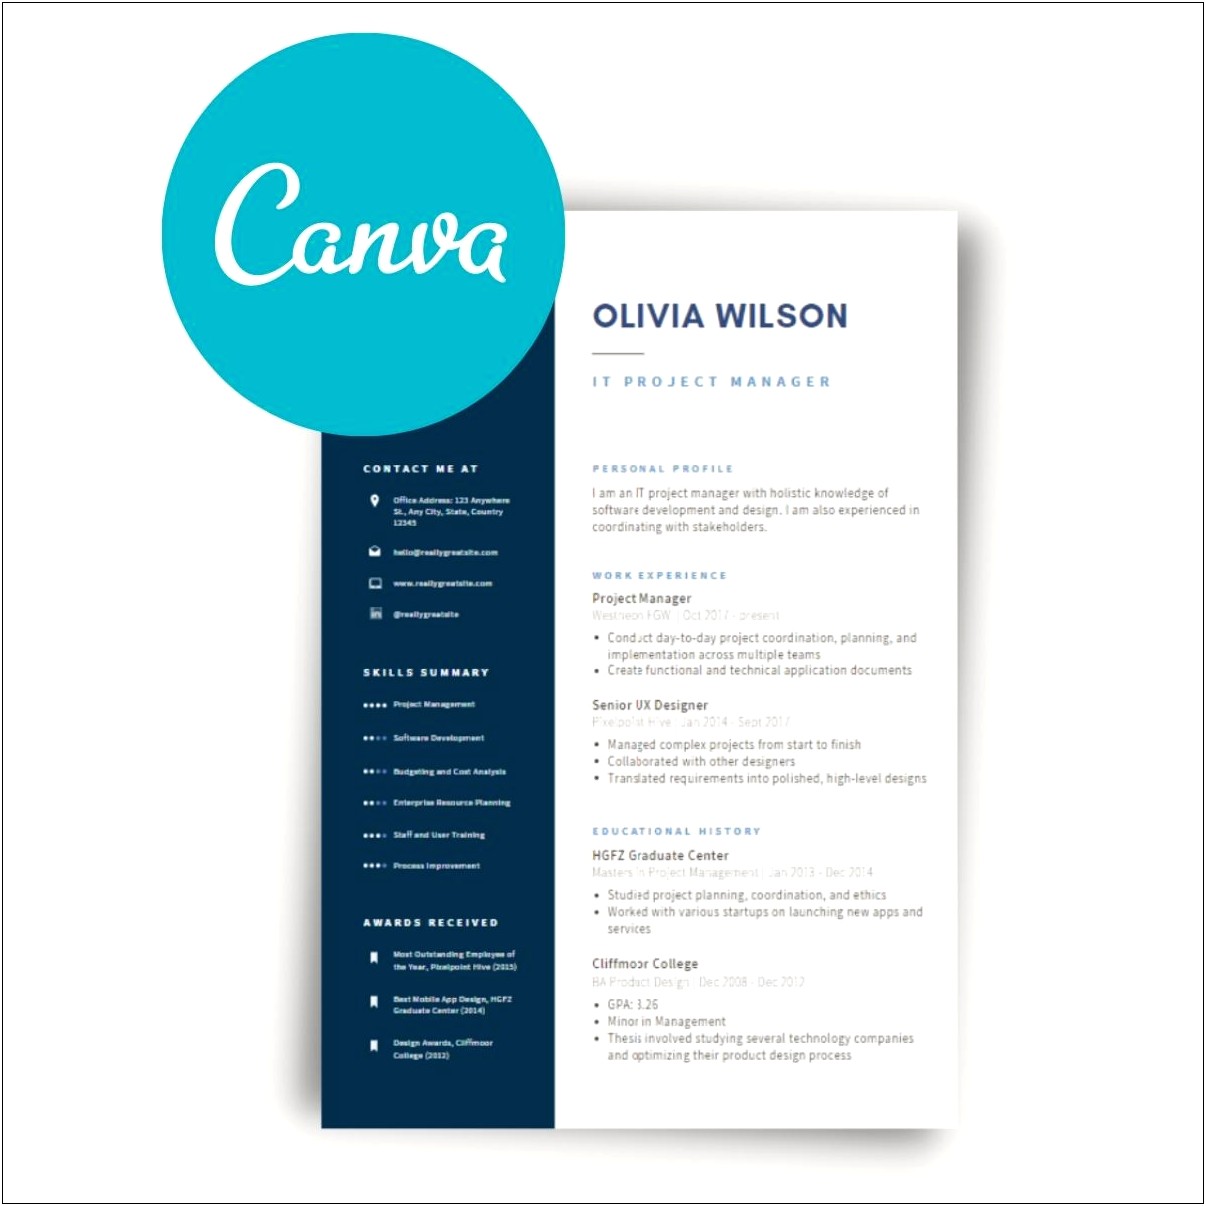 Help With Wording On Resumes Canva